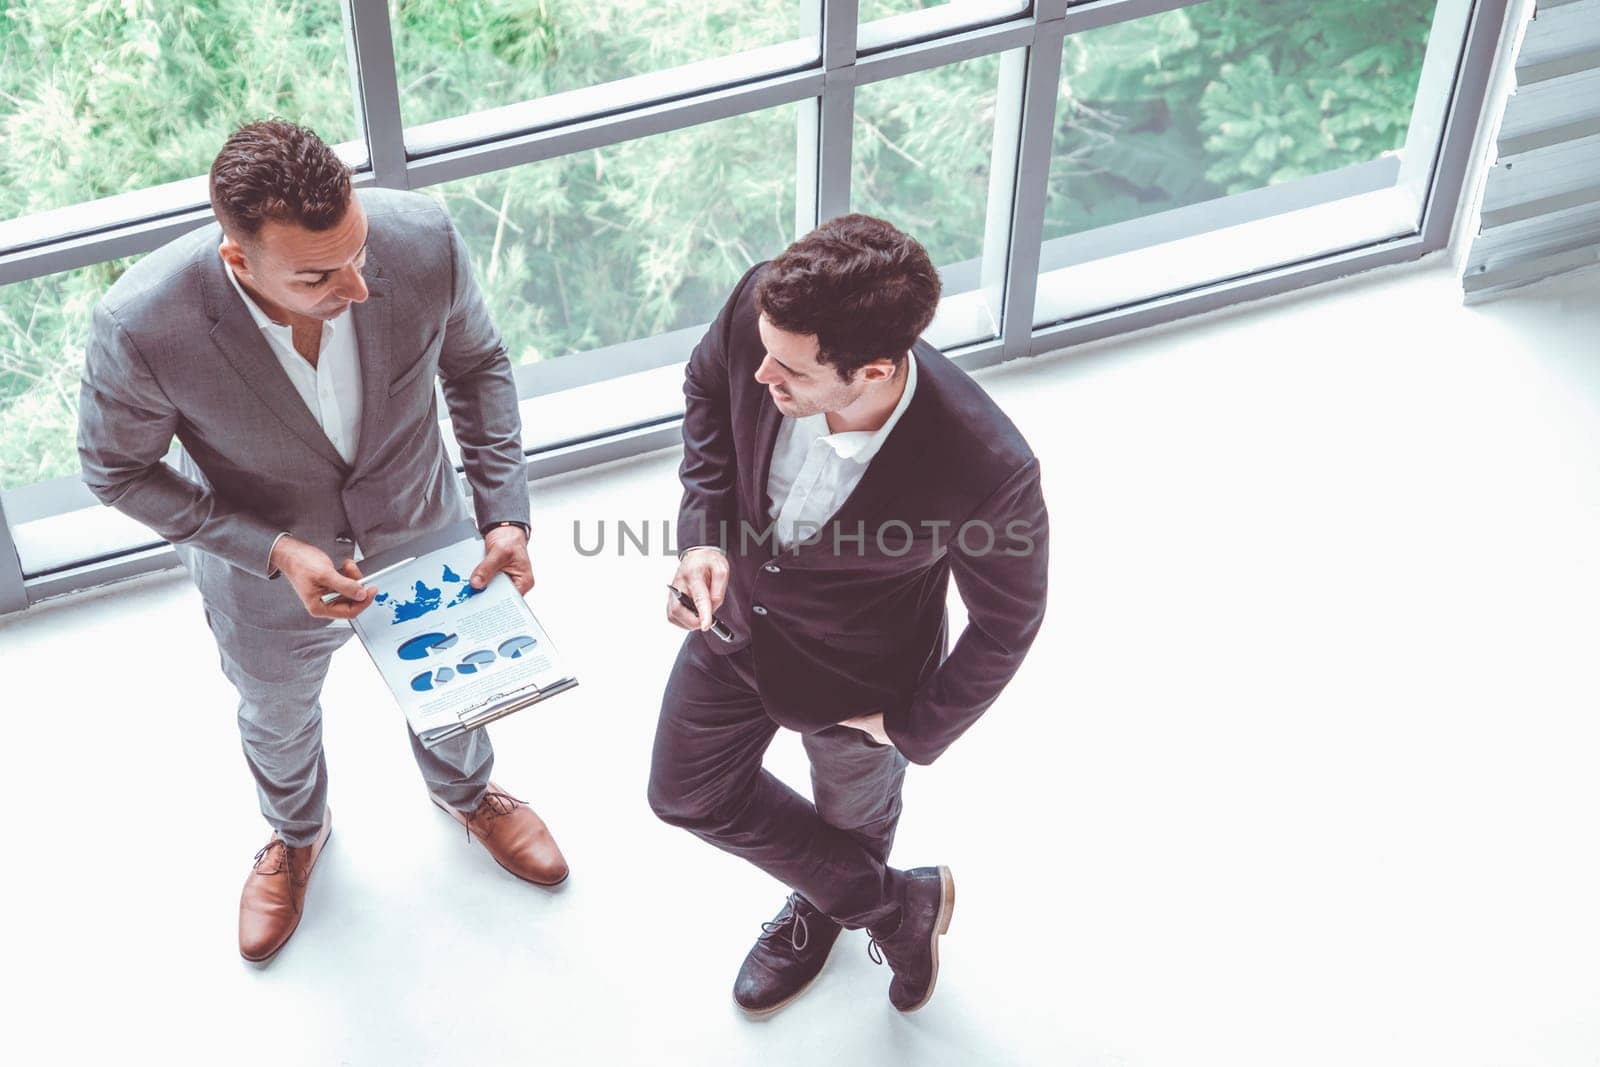 Businessman is in meeting discussion with another businessman partner in modern workplace office. People corporate business team concept. uds